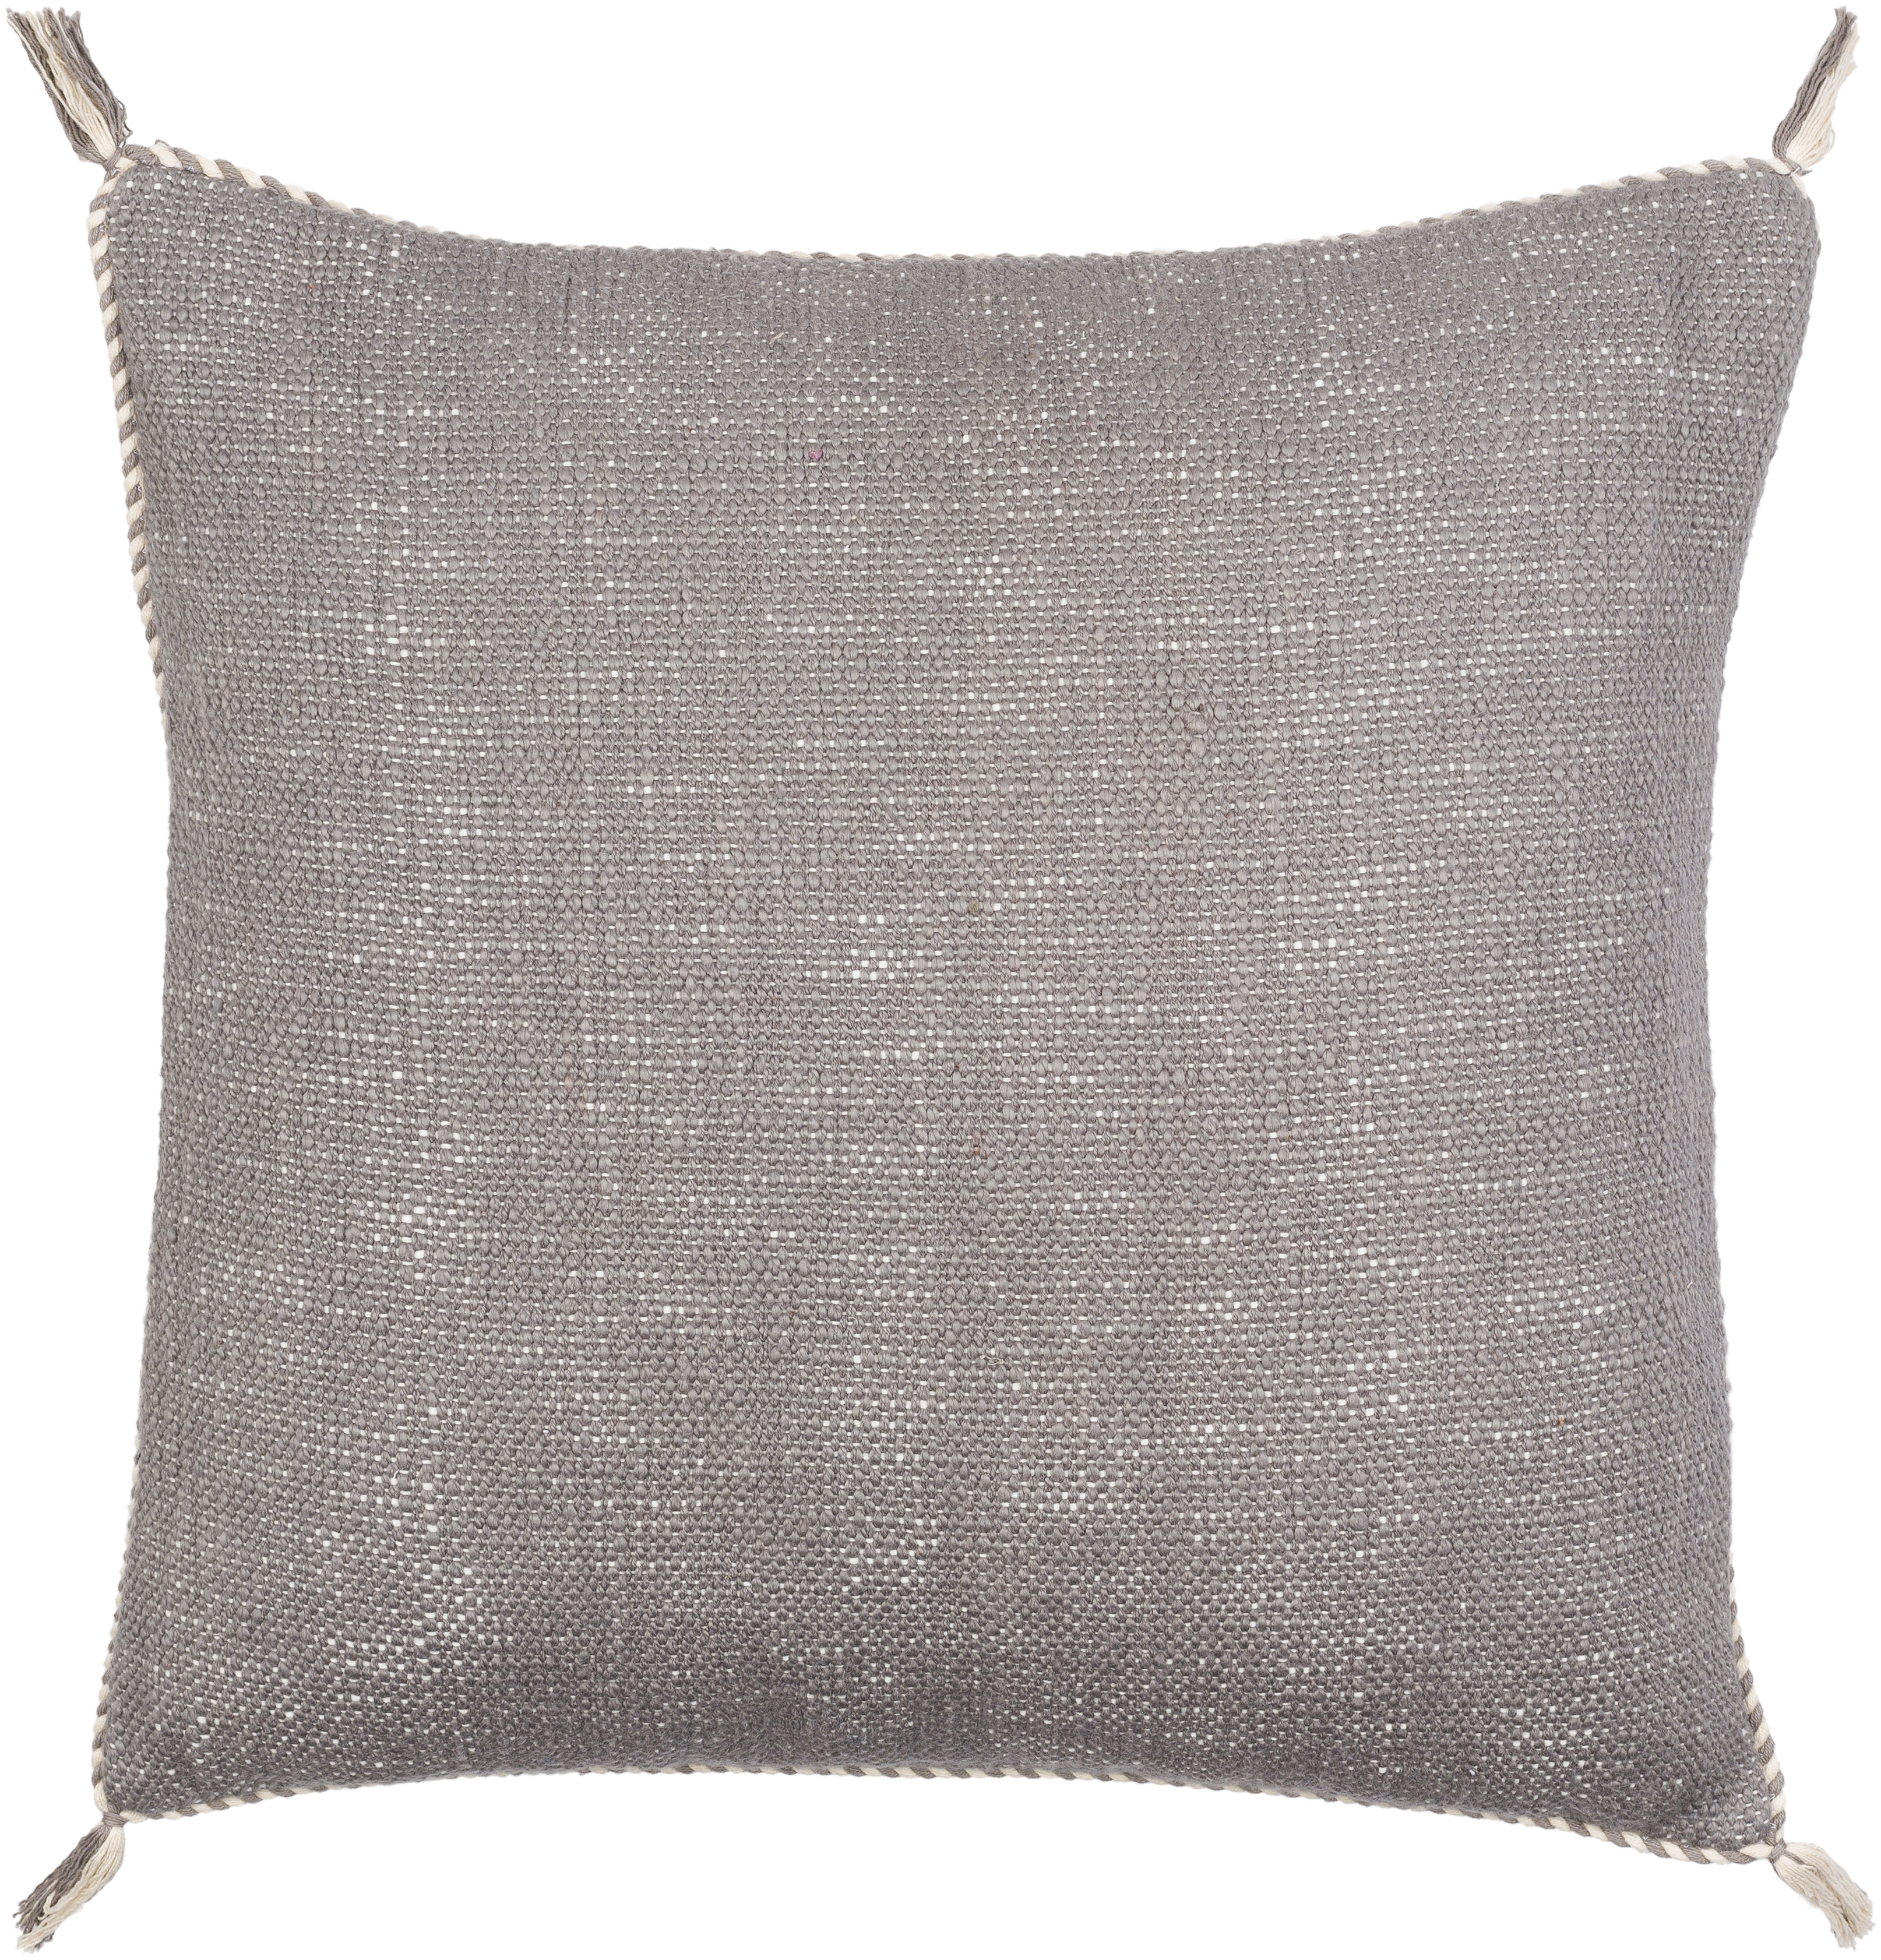 Braided Bisa Throw Pillow, 18" x 18", pillow cover only - Image 0